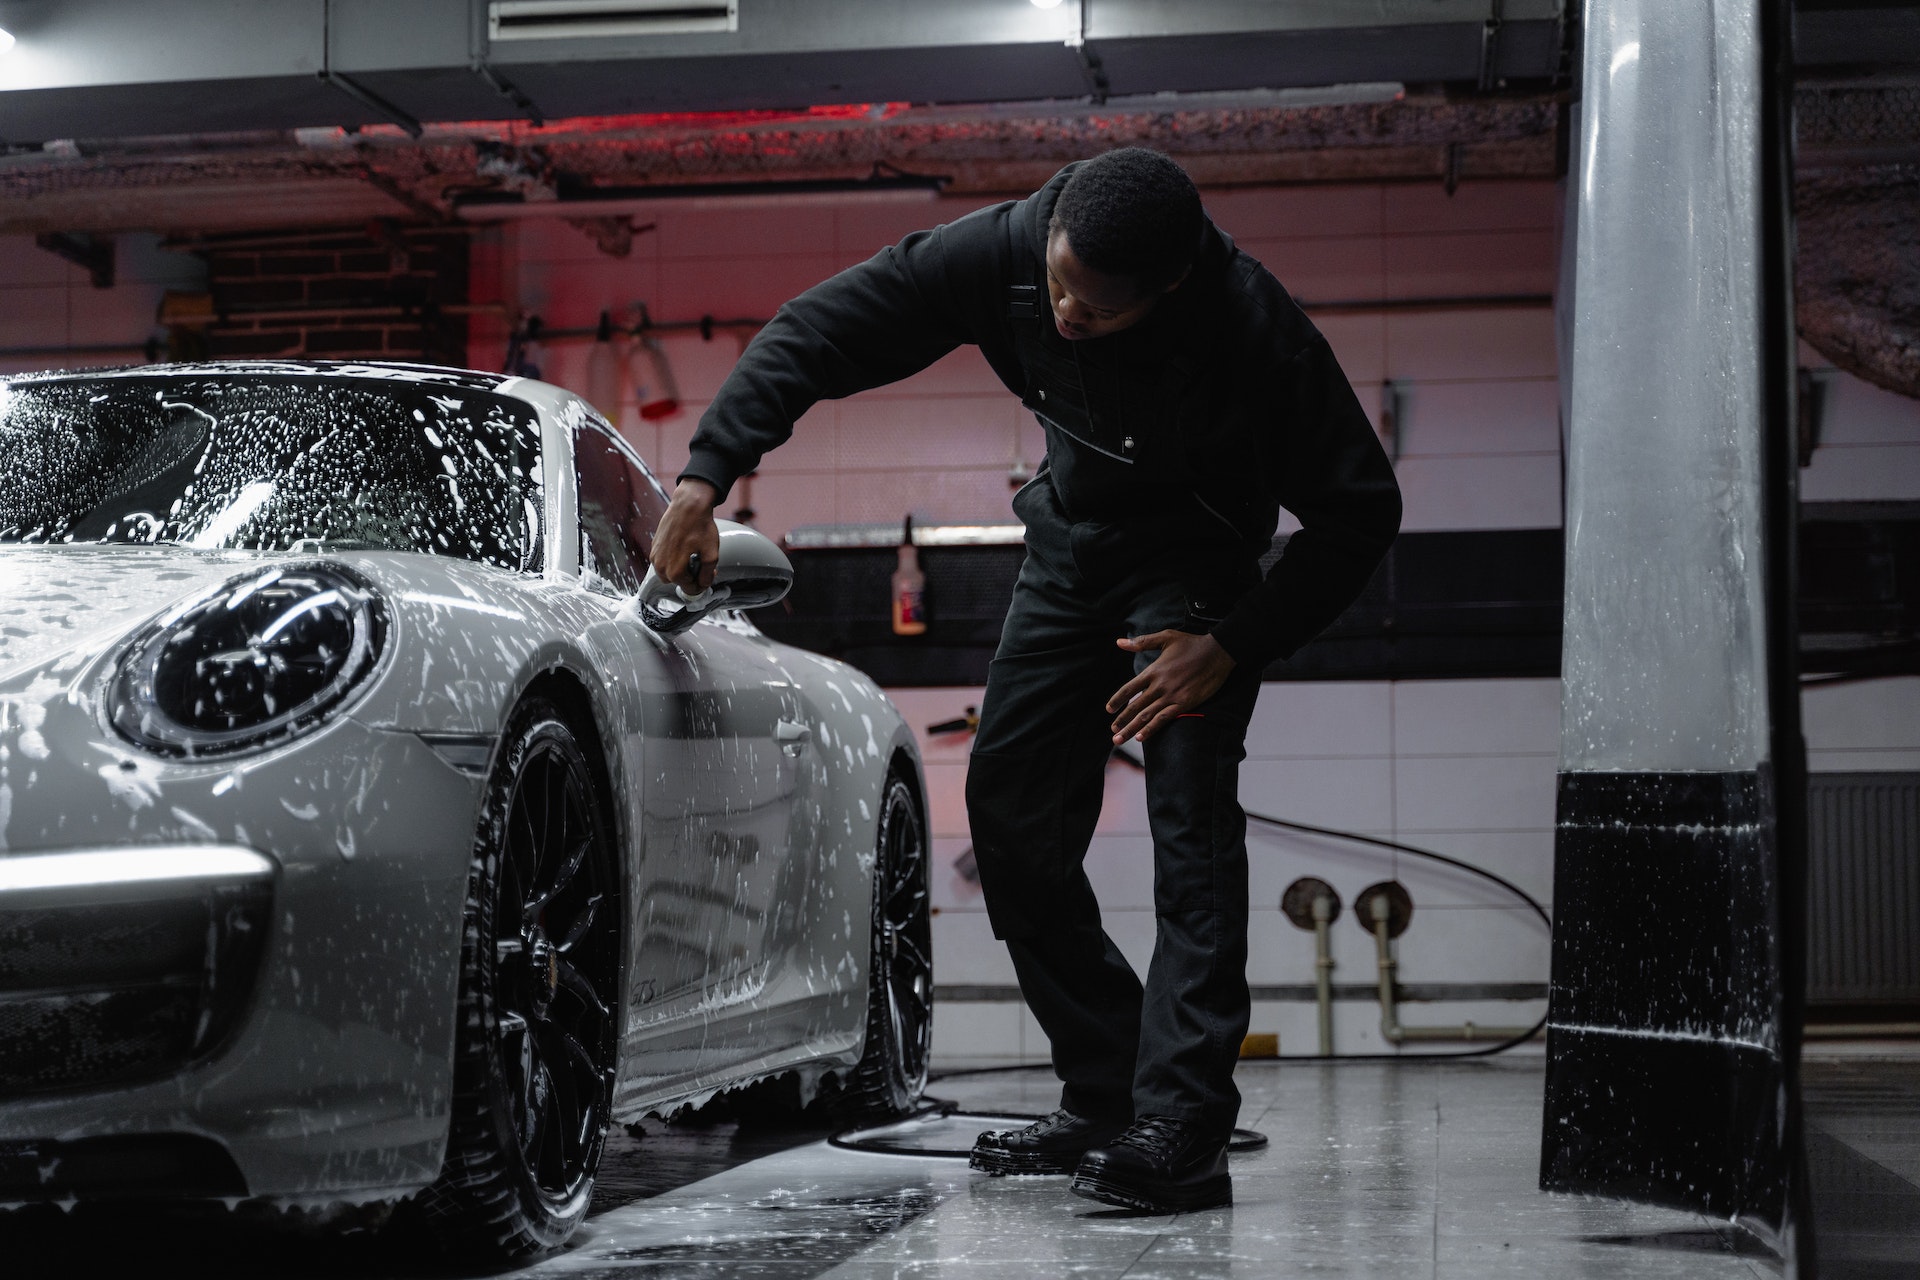 Inside a car detailing garage, a man in black overalls works cleaning a soapy, silver Porsche sports car.